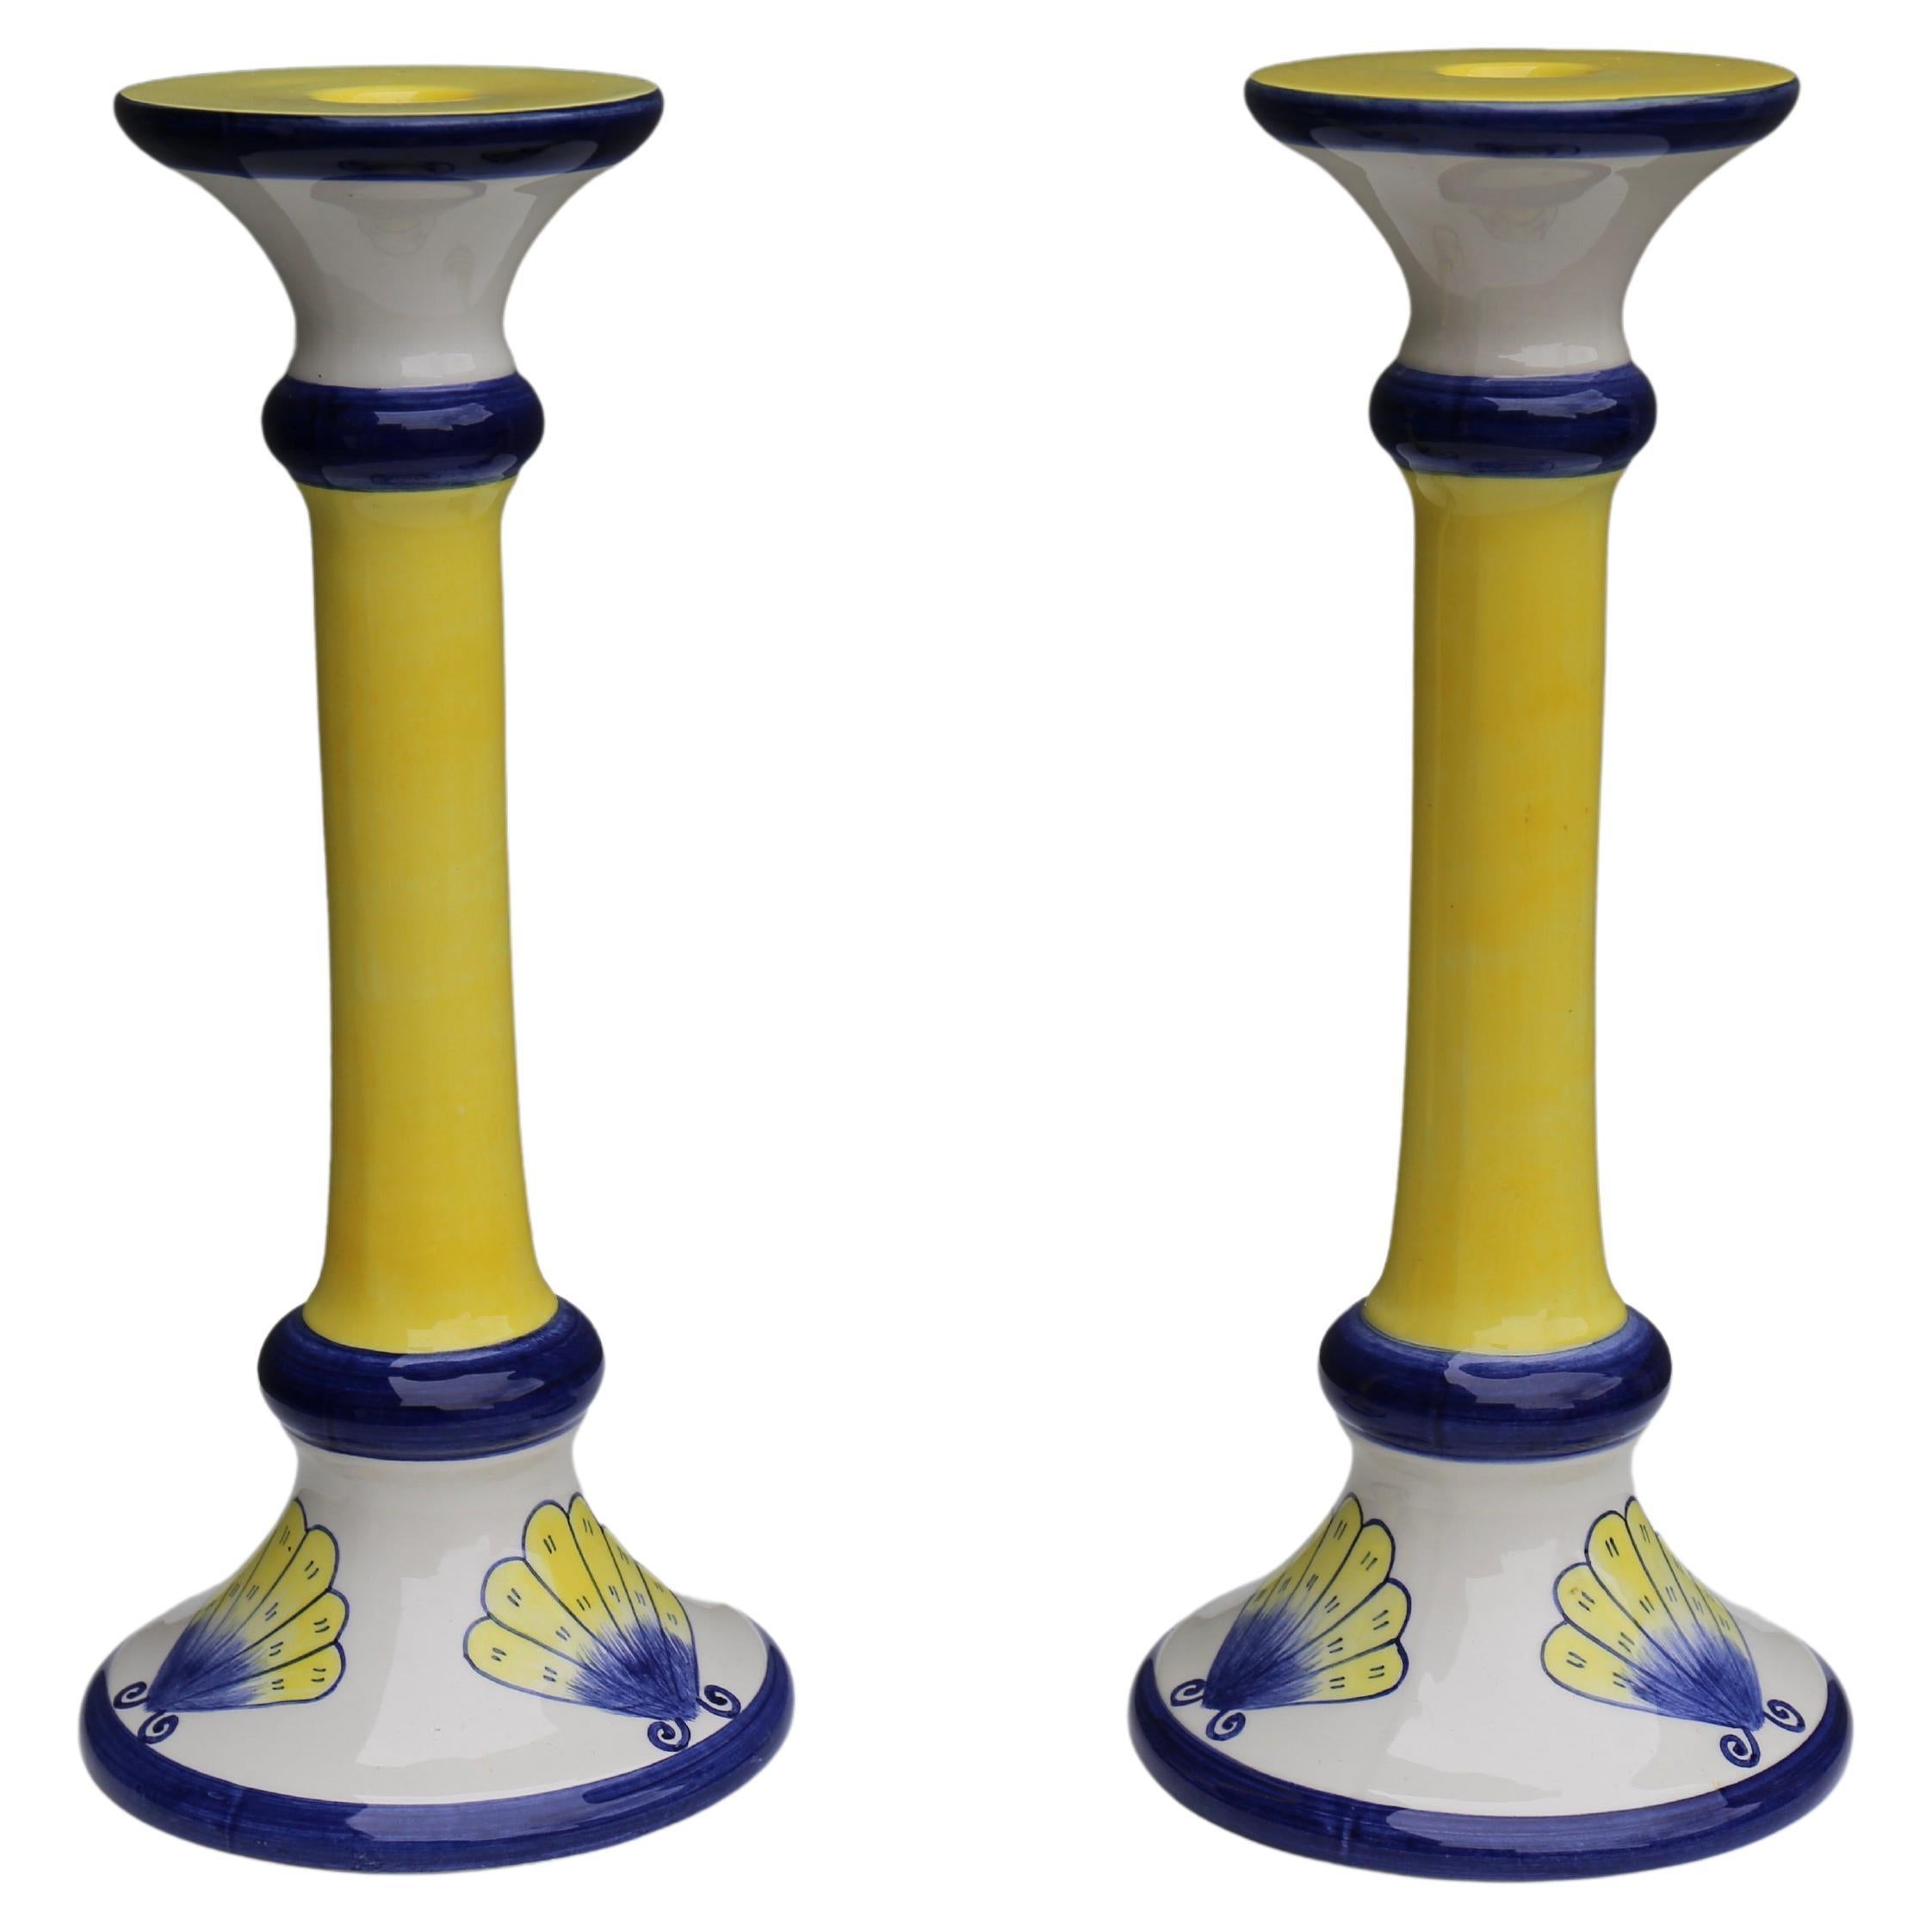 A fine pair of Italian hand painted porcelain candelabra with butterfly decor.

Height 12.2